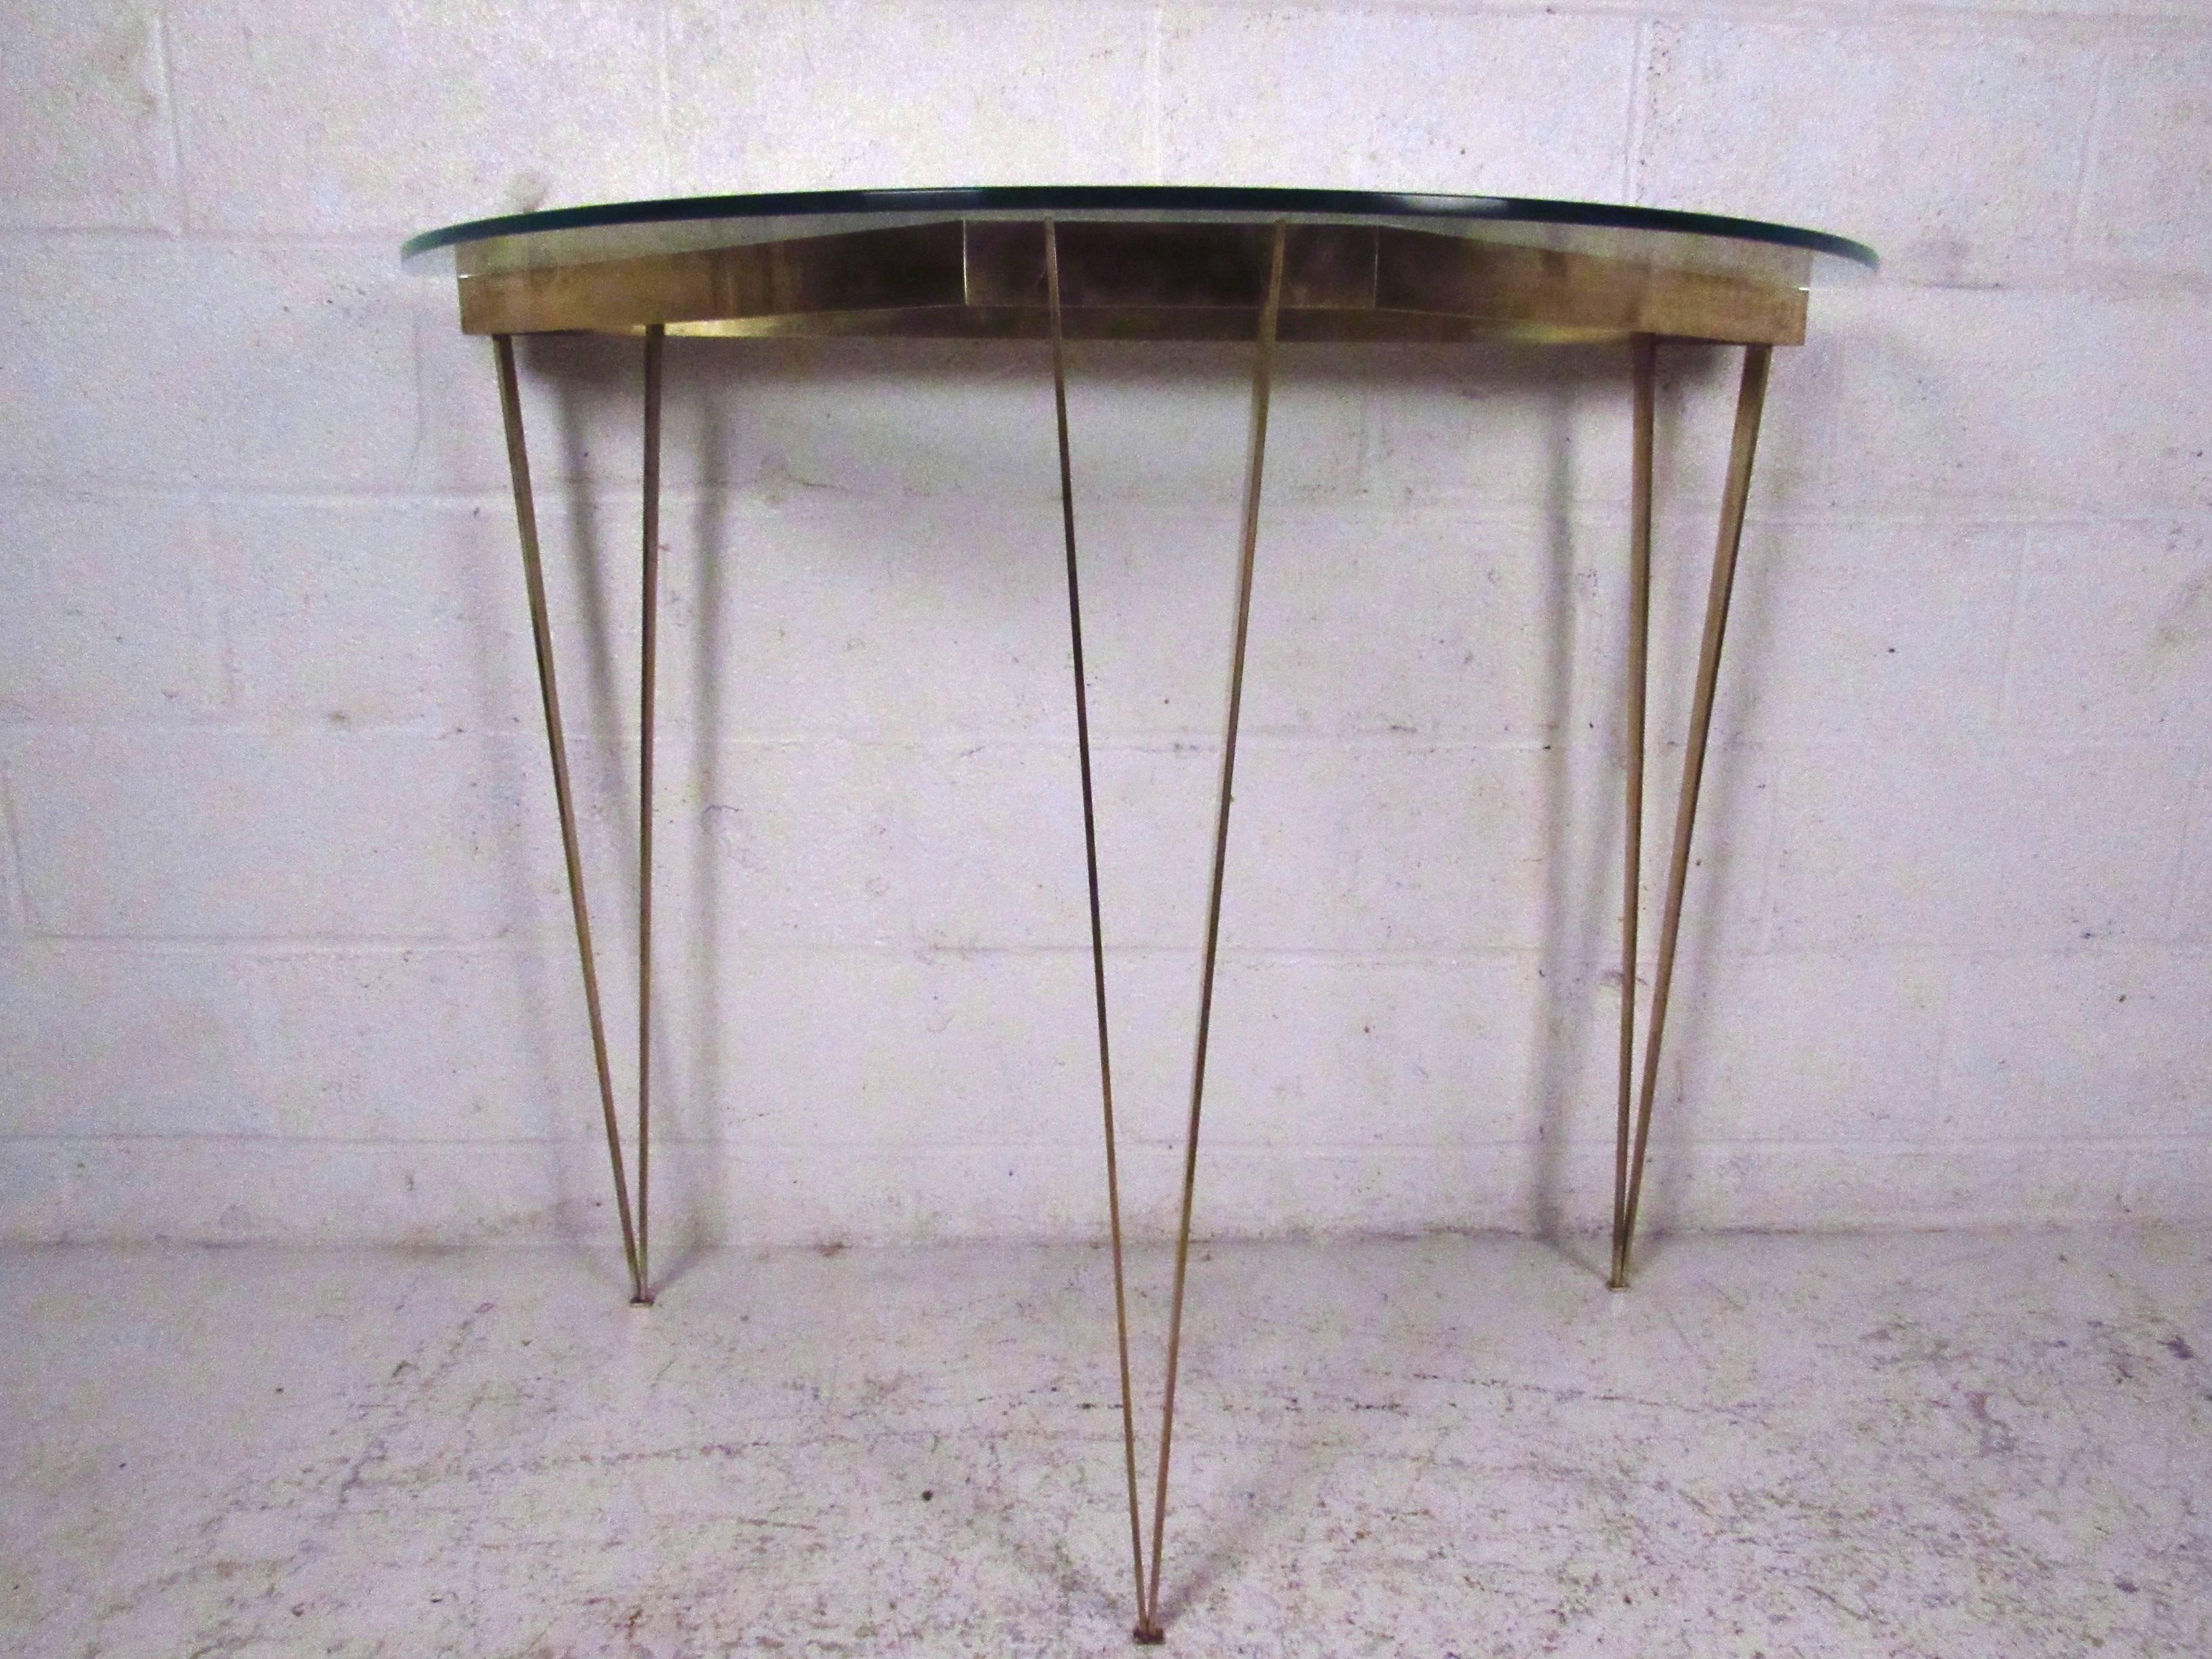 This unique vintage table features bronze finish hairpin legs with demilune glass top, and makes an excellent addition to entryway or display area. Flat stock bronze makes this a stylish and elegant piece for any interior. Please confirm item